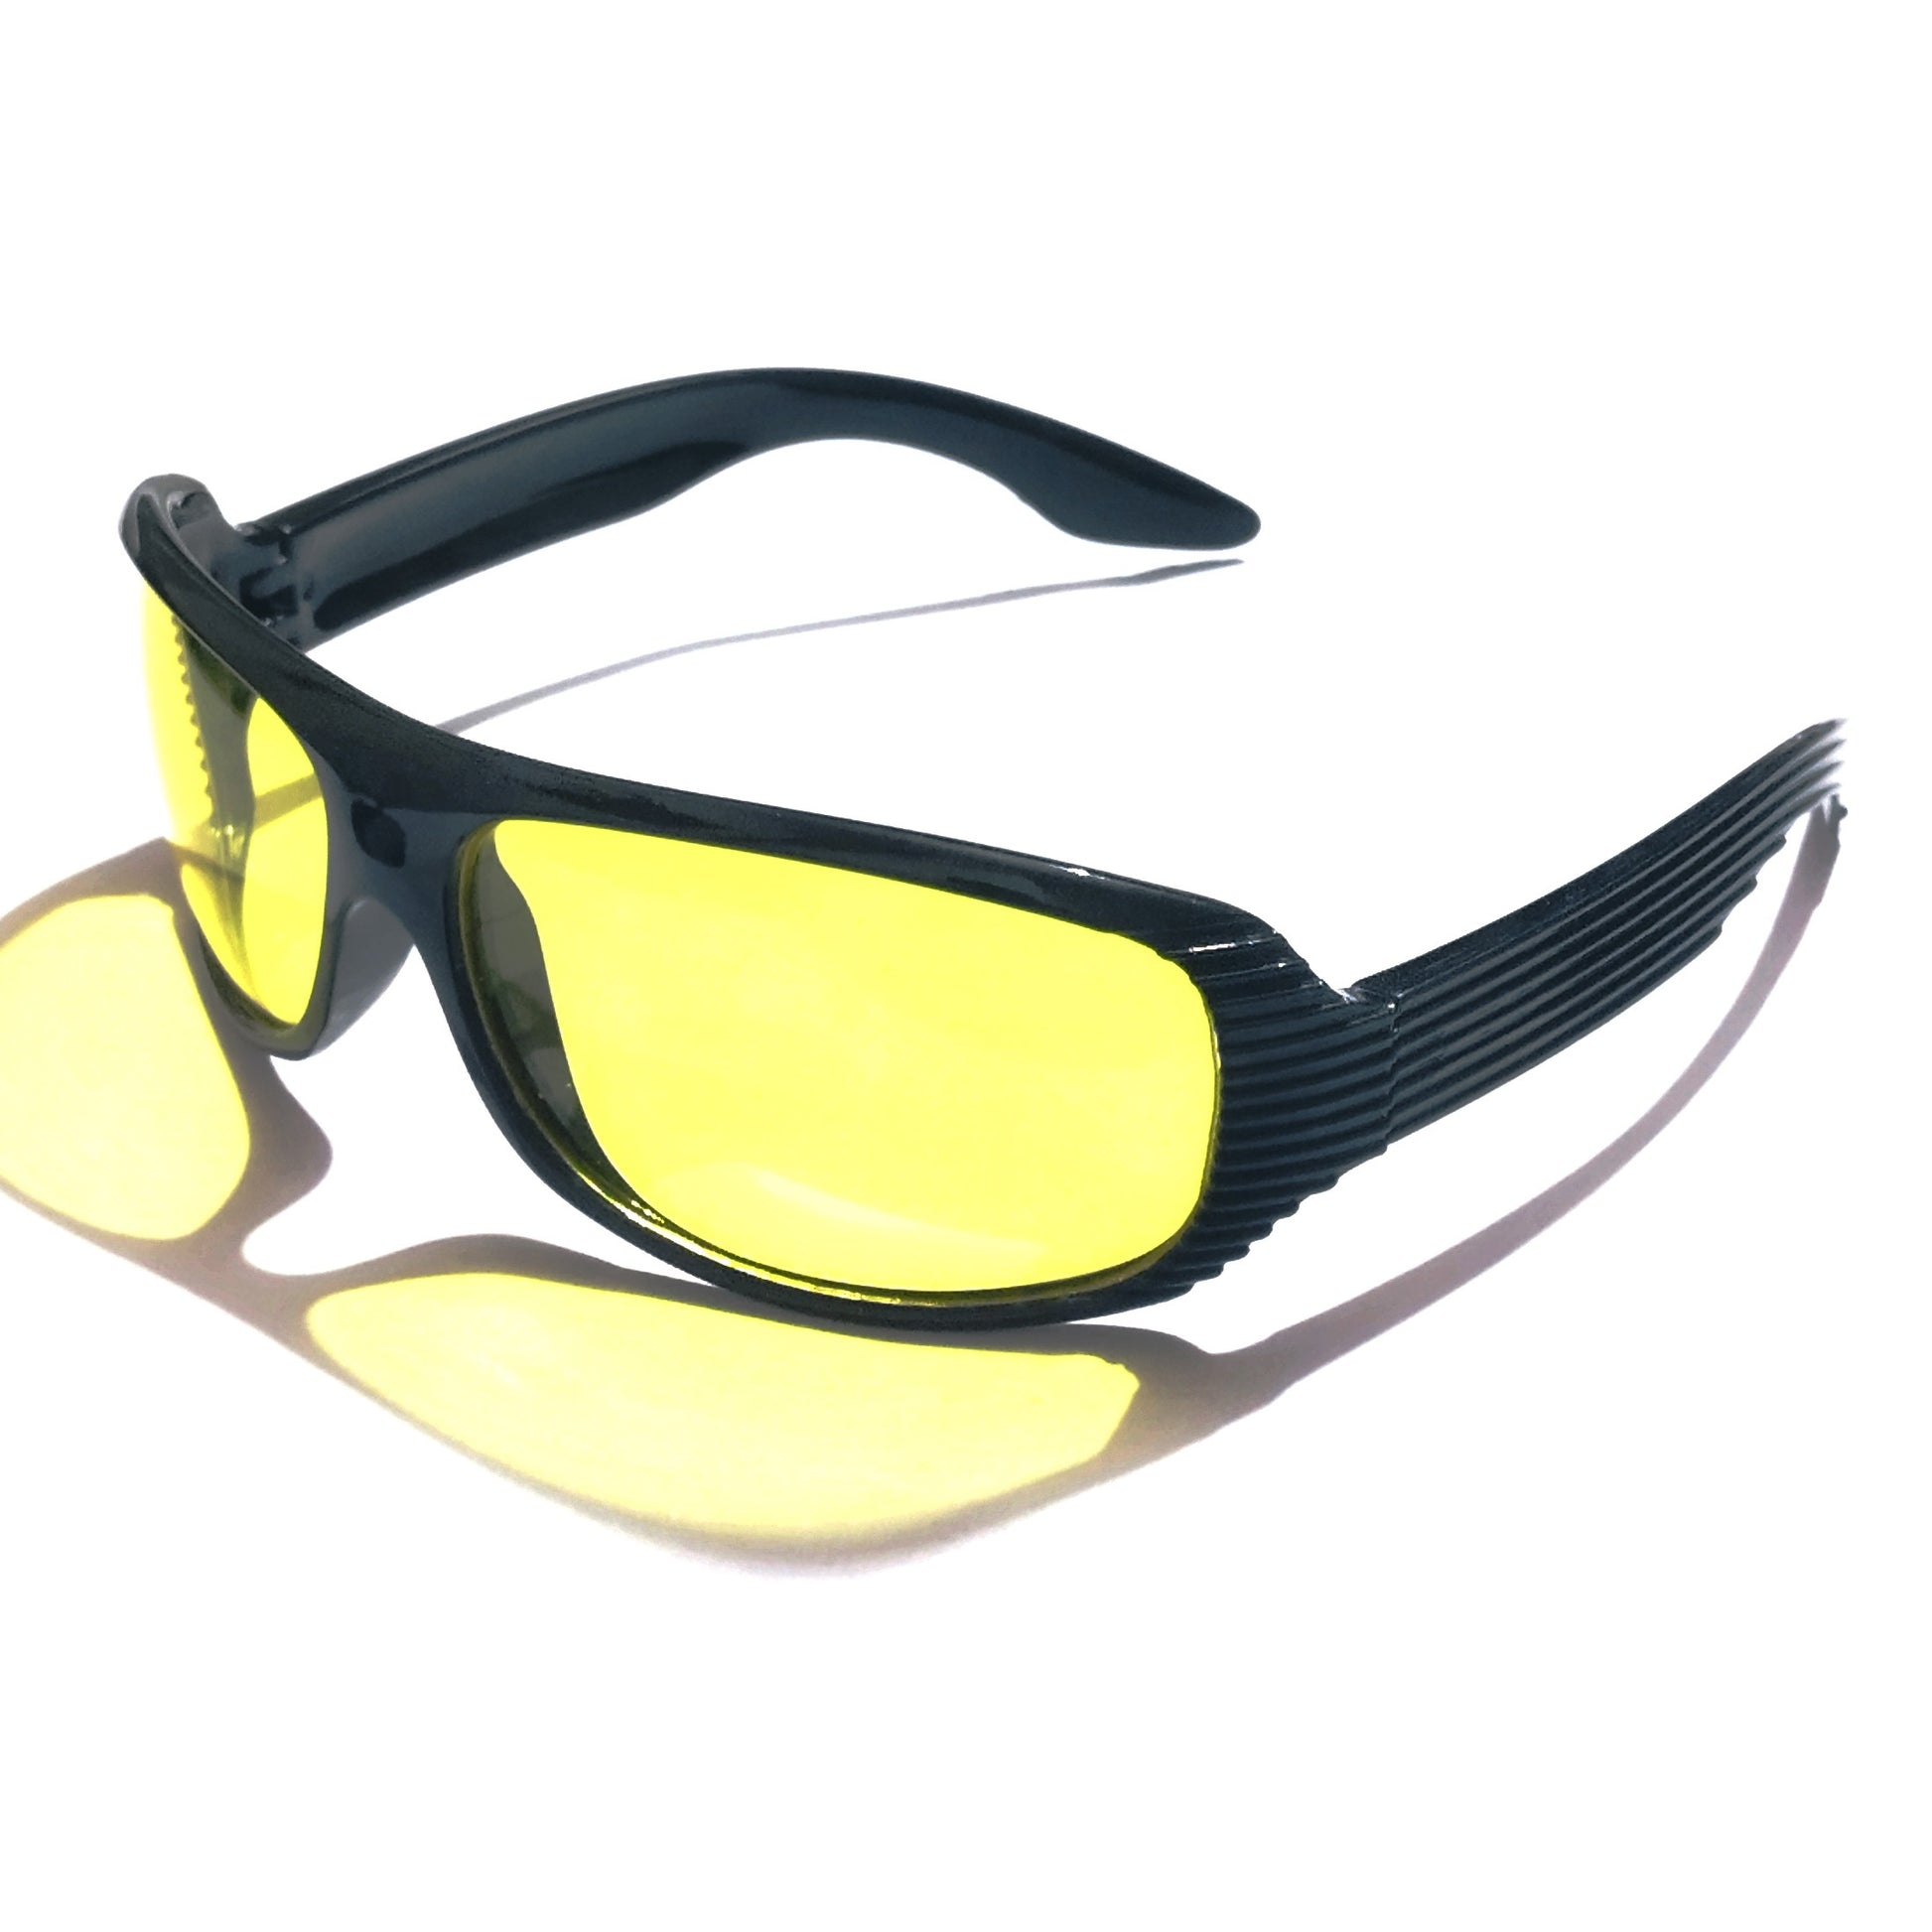 Yellow Night Vision Riding Glasses for Men Driving Sunglasses M12